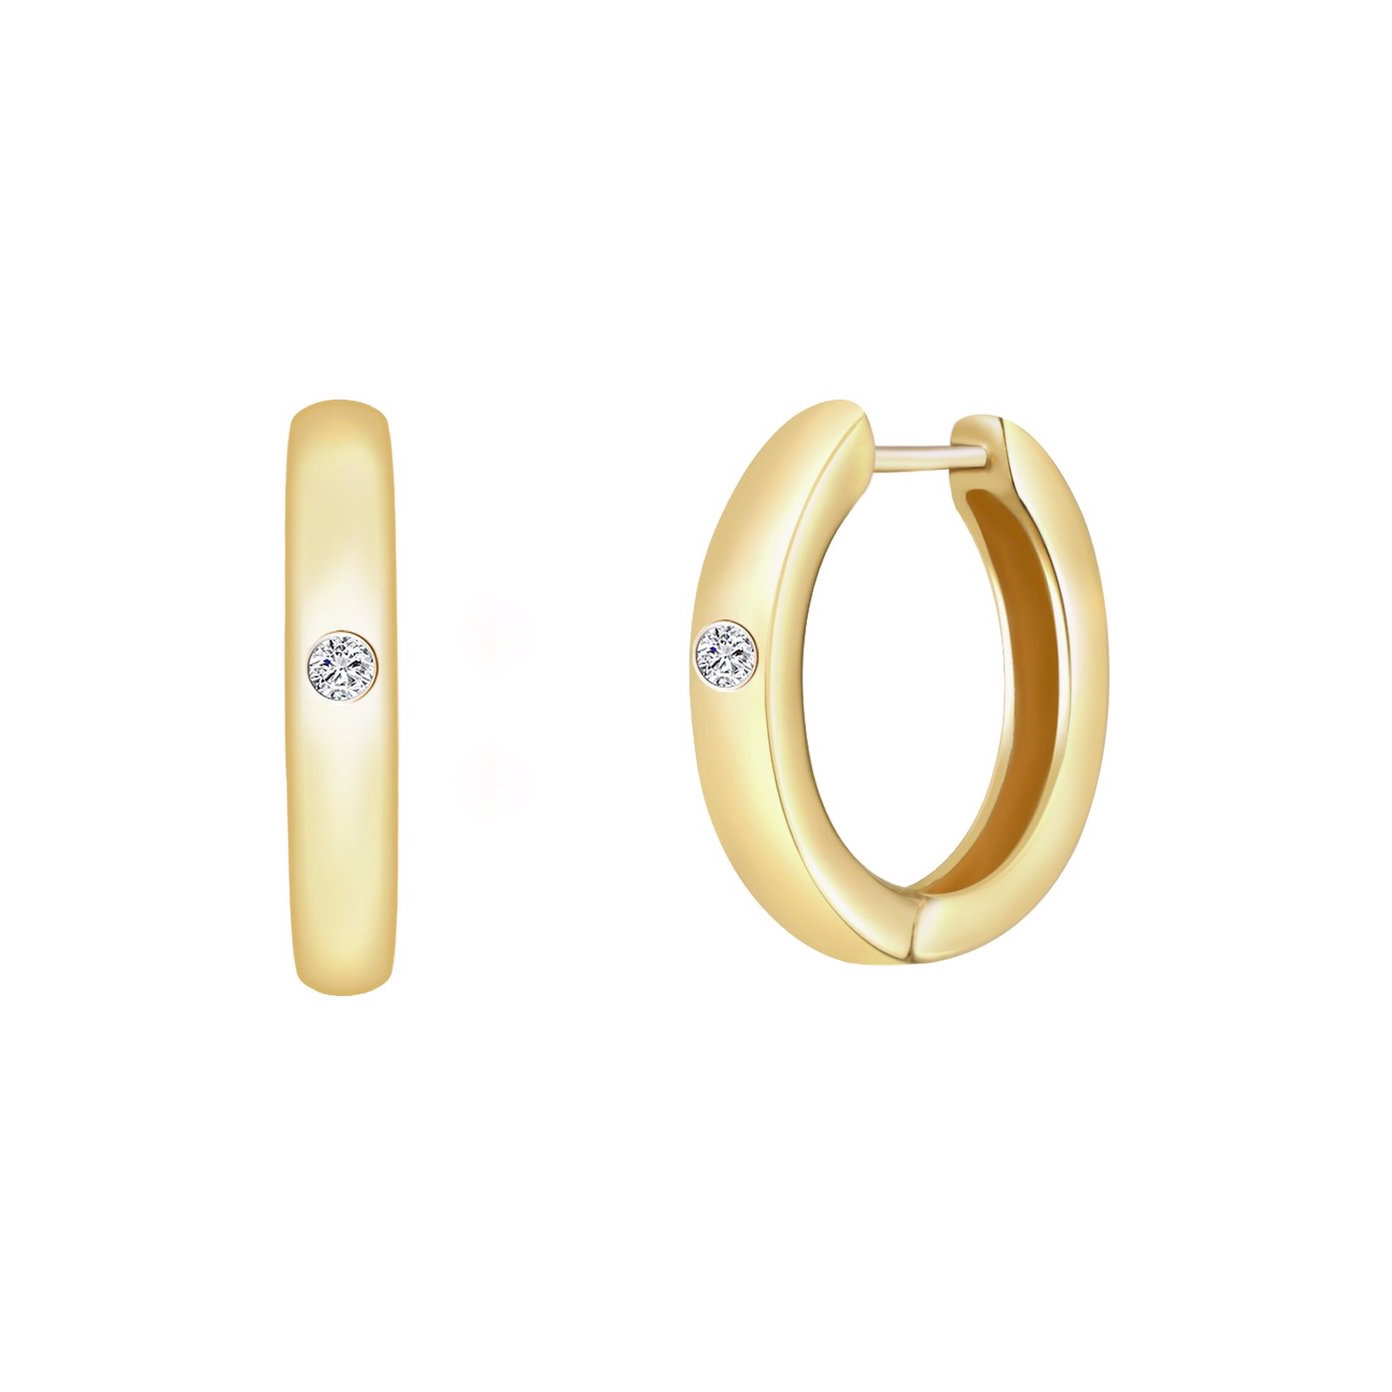 Yellow gold plated OEM/ODM Jewelry sterling silver earrings custom engraved supplier